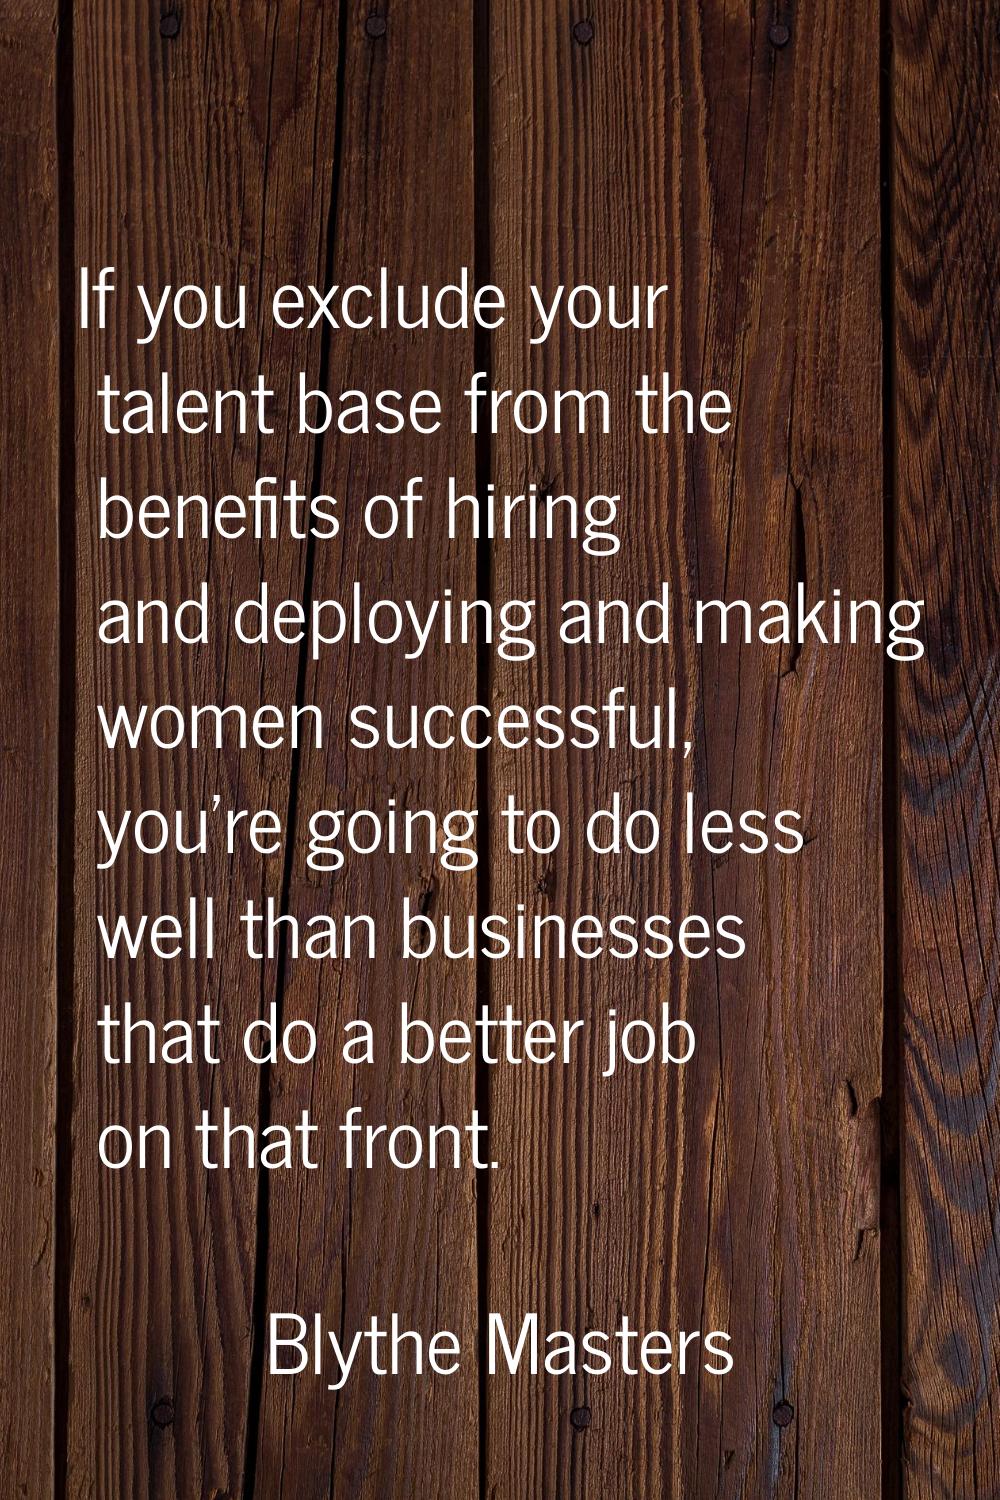 If you exclude your talent base from the benefits of hiring and deploying and making women successf